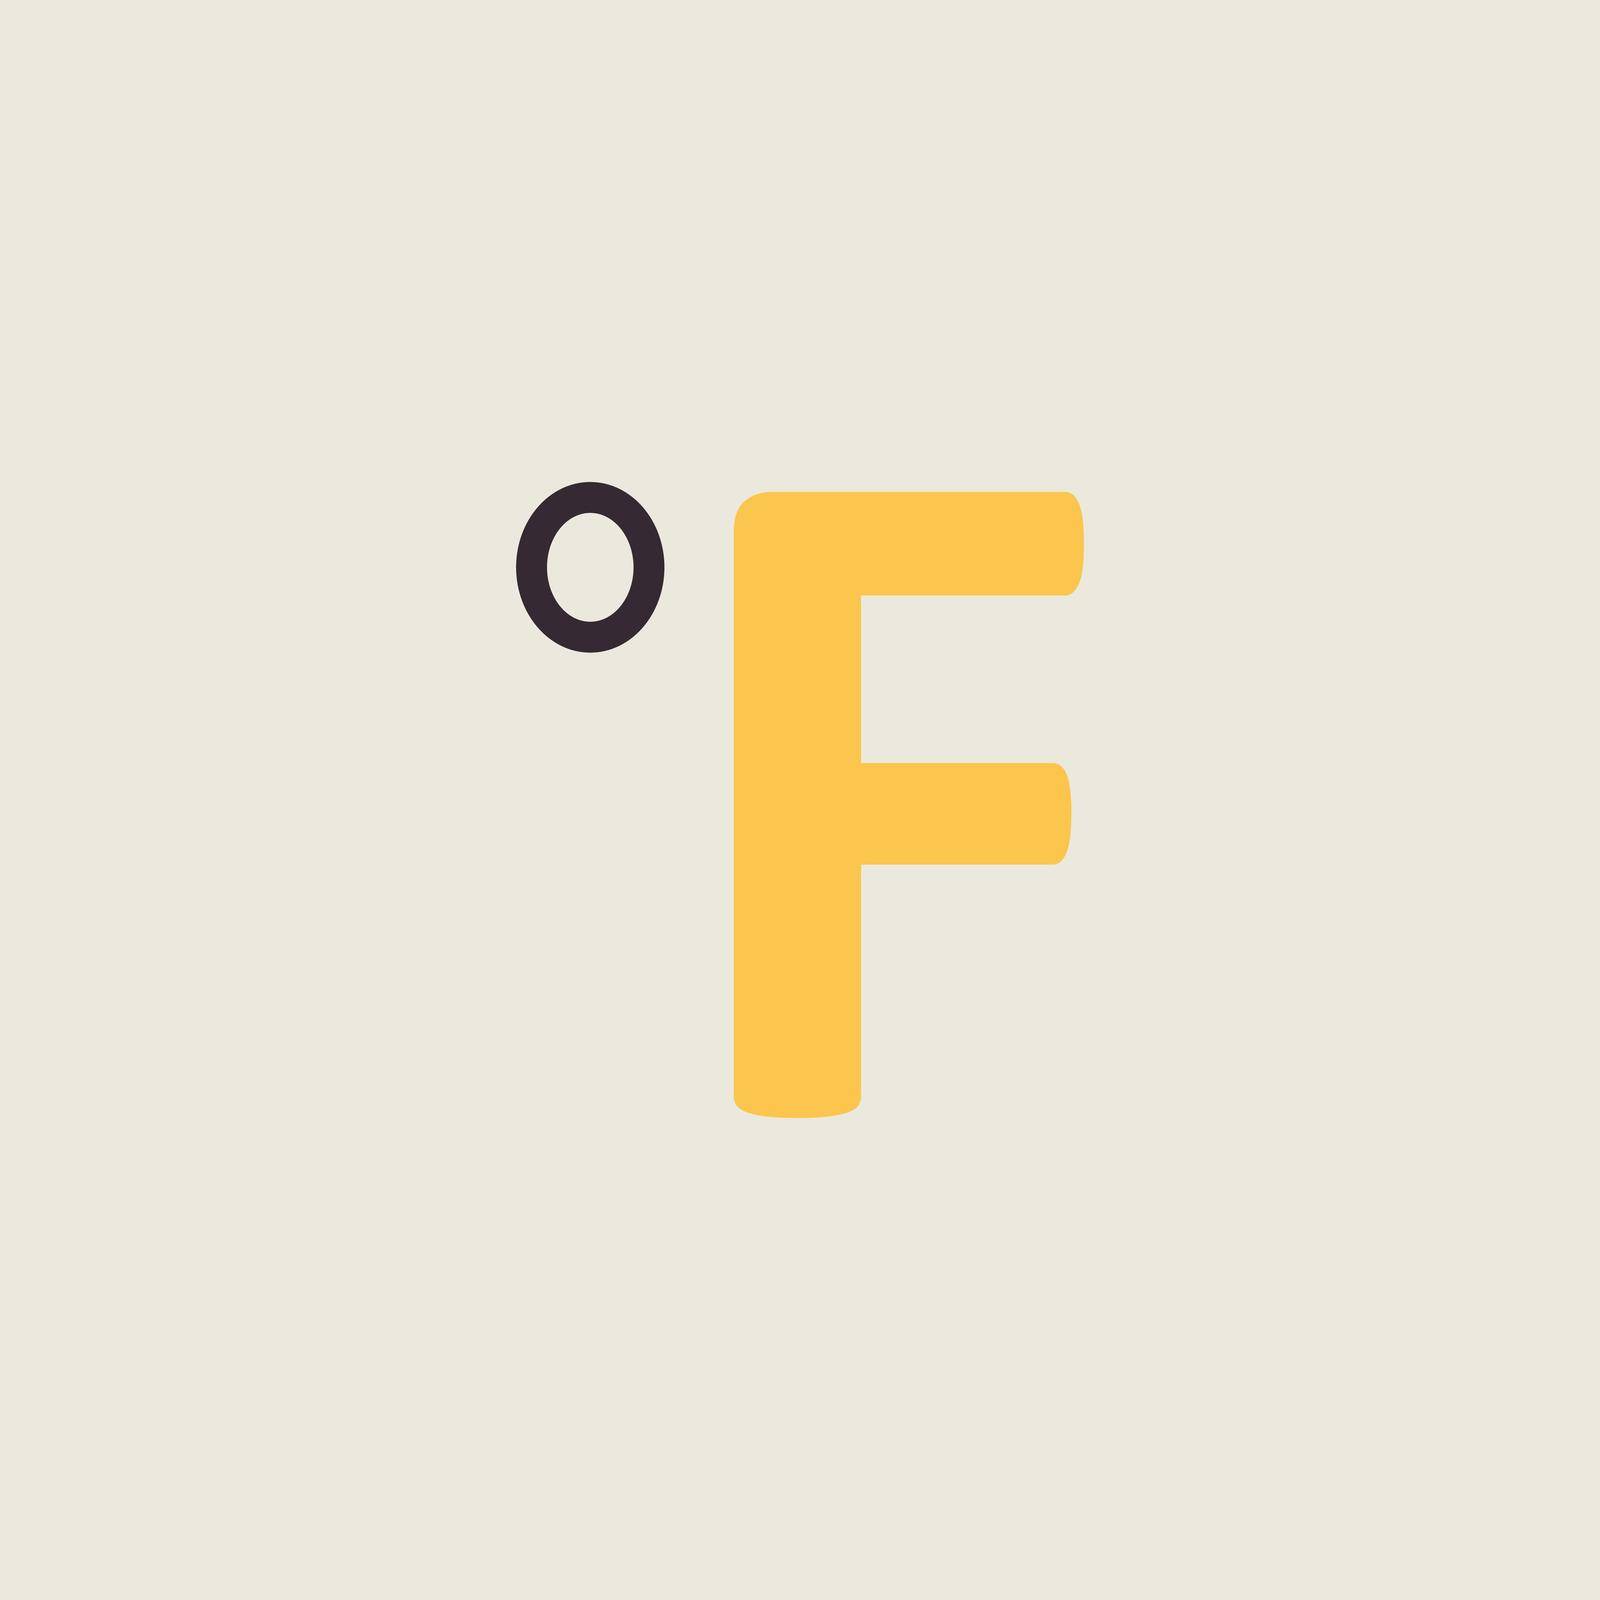 Fahrenheit degrees vector flat icon. Weather sign by nosik